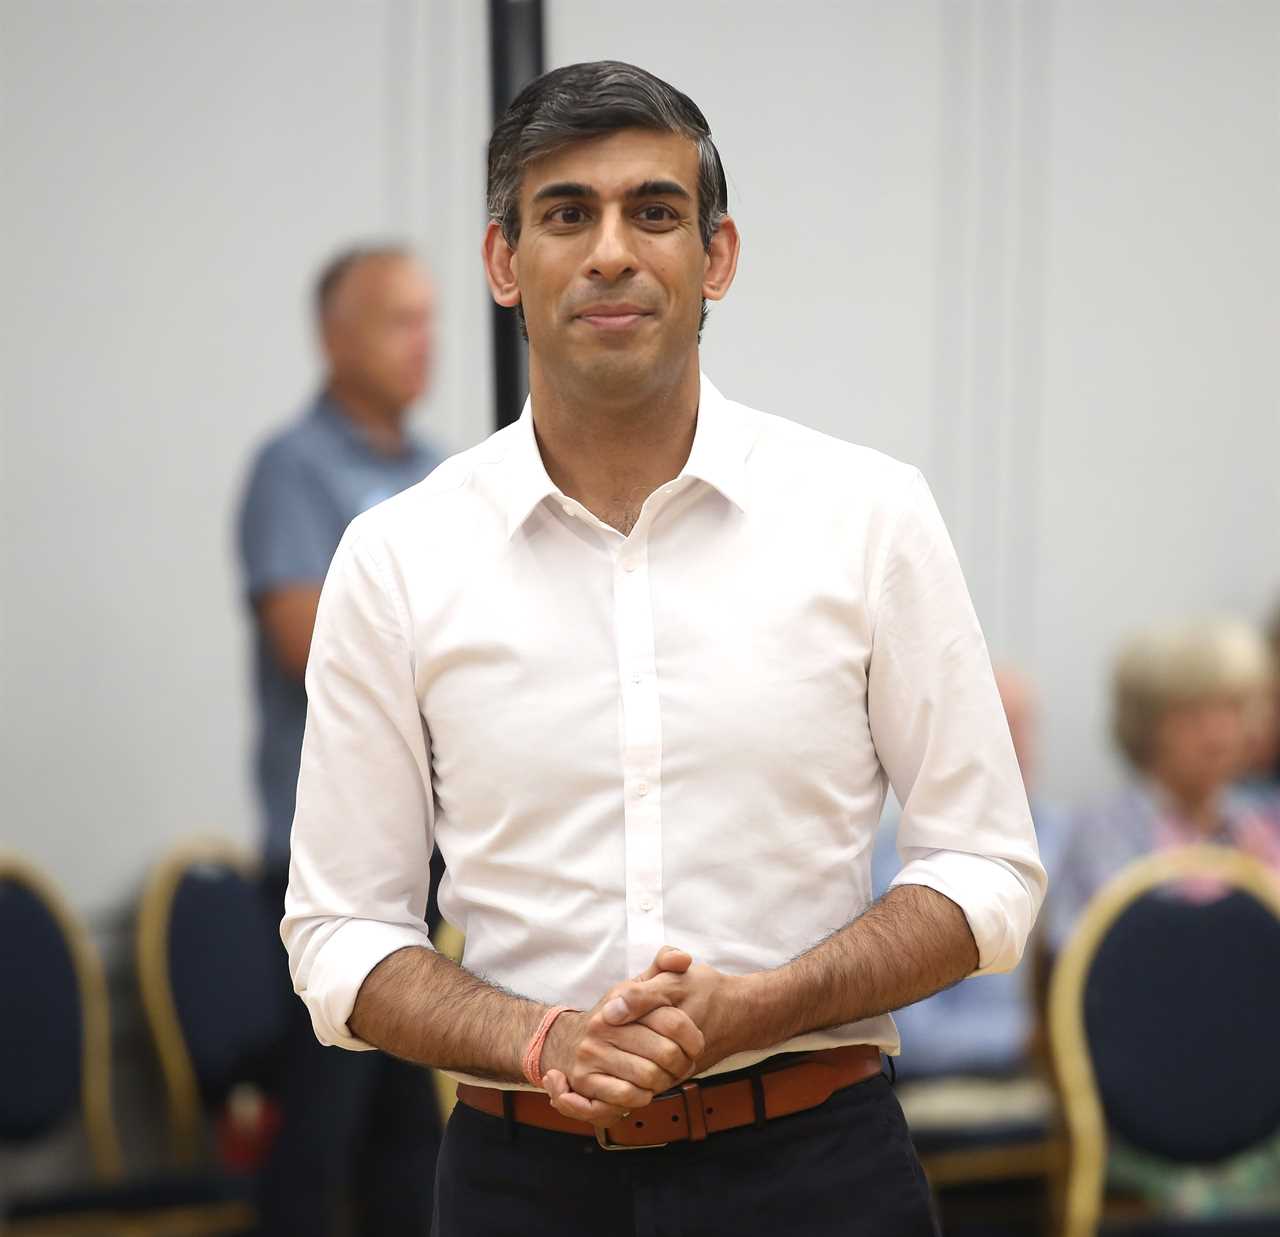 Brits would see £200 slashed from energy bills a year under Rishi Sunak’s plans to cancel out price rises